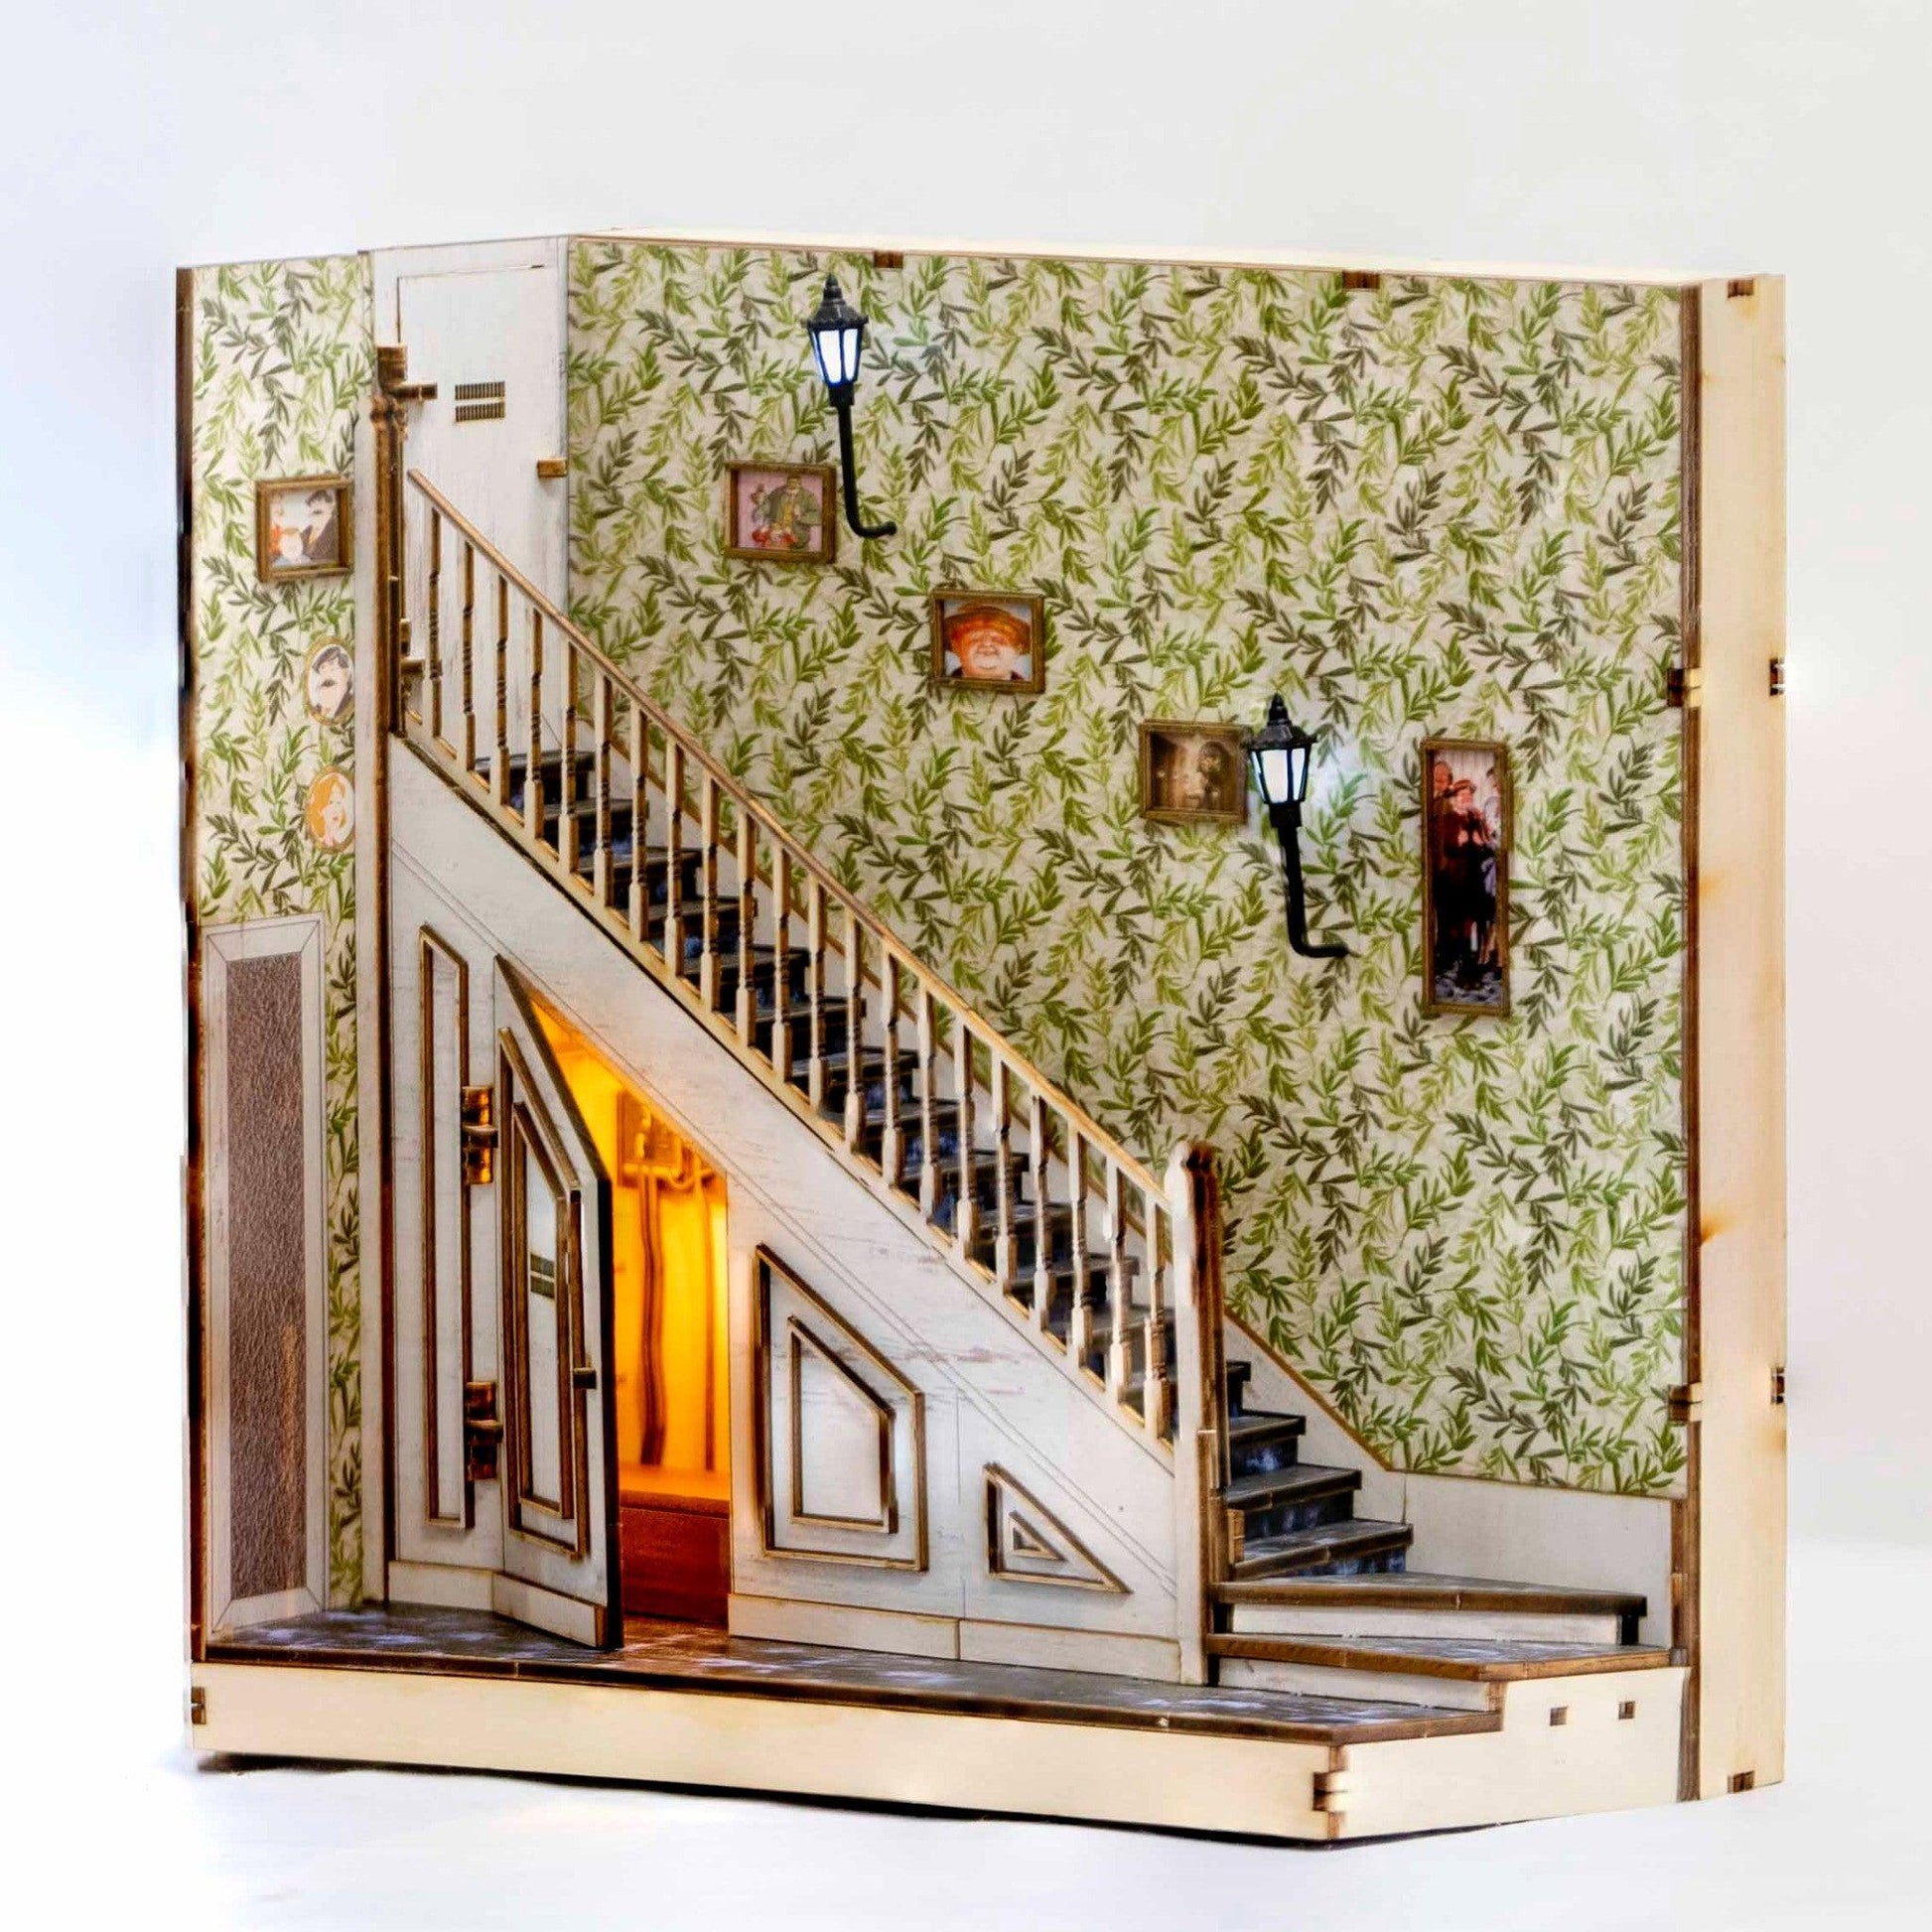 The Cupboard Under Stairs Book Nook - DIY Book Nook Kits - Wizard Alley Book Nooks Magic Alley Book Shelf Insert Book Scenery with LED - Rajbharti Crafts